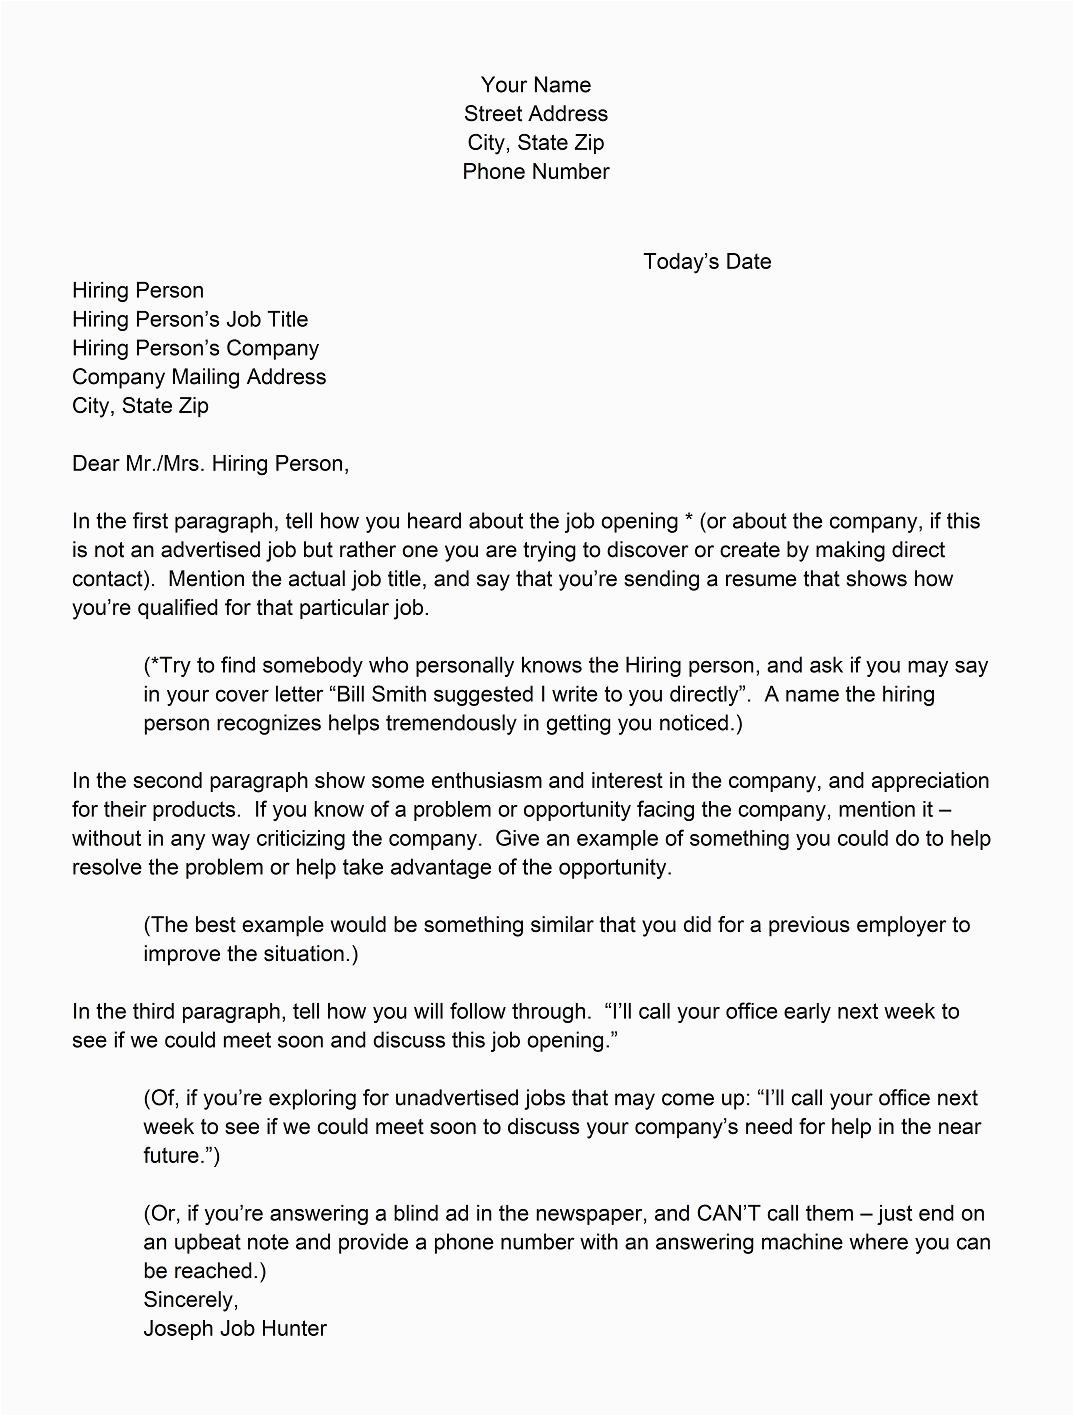 The Best Resume Cover Letter Samples 5 Best Examples Of Writing A Good Cover Letter Templates